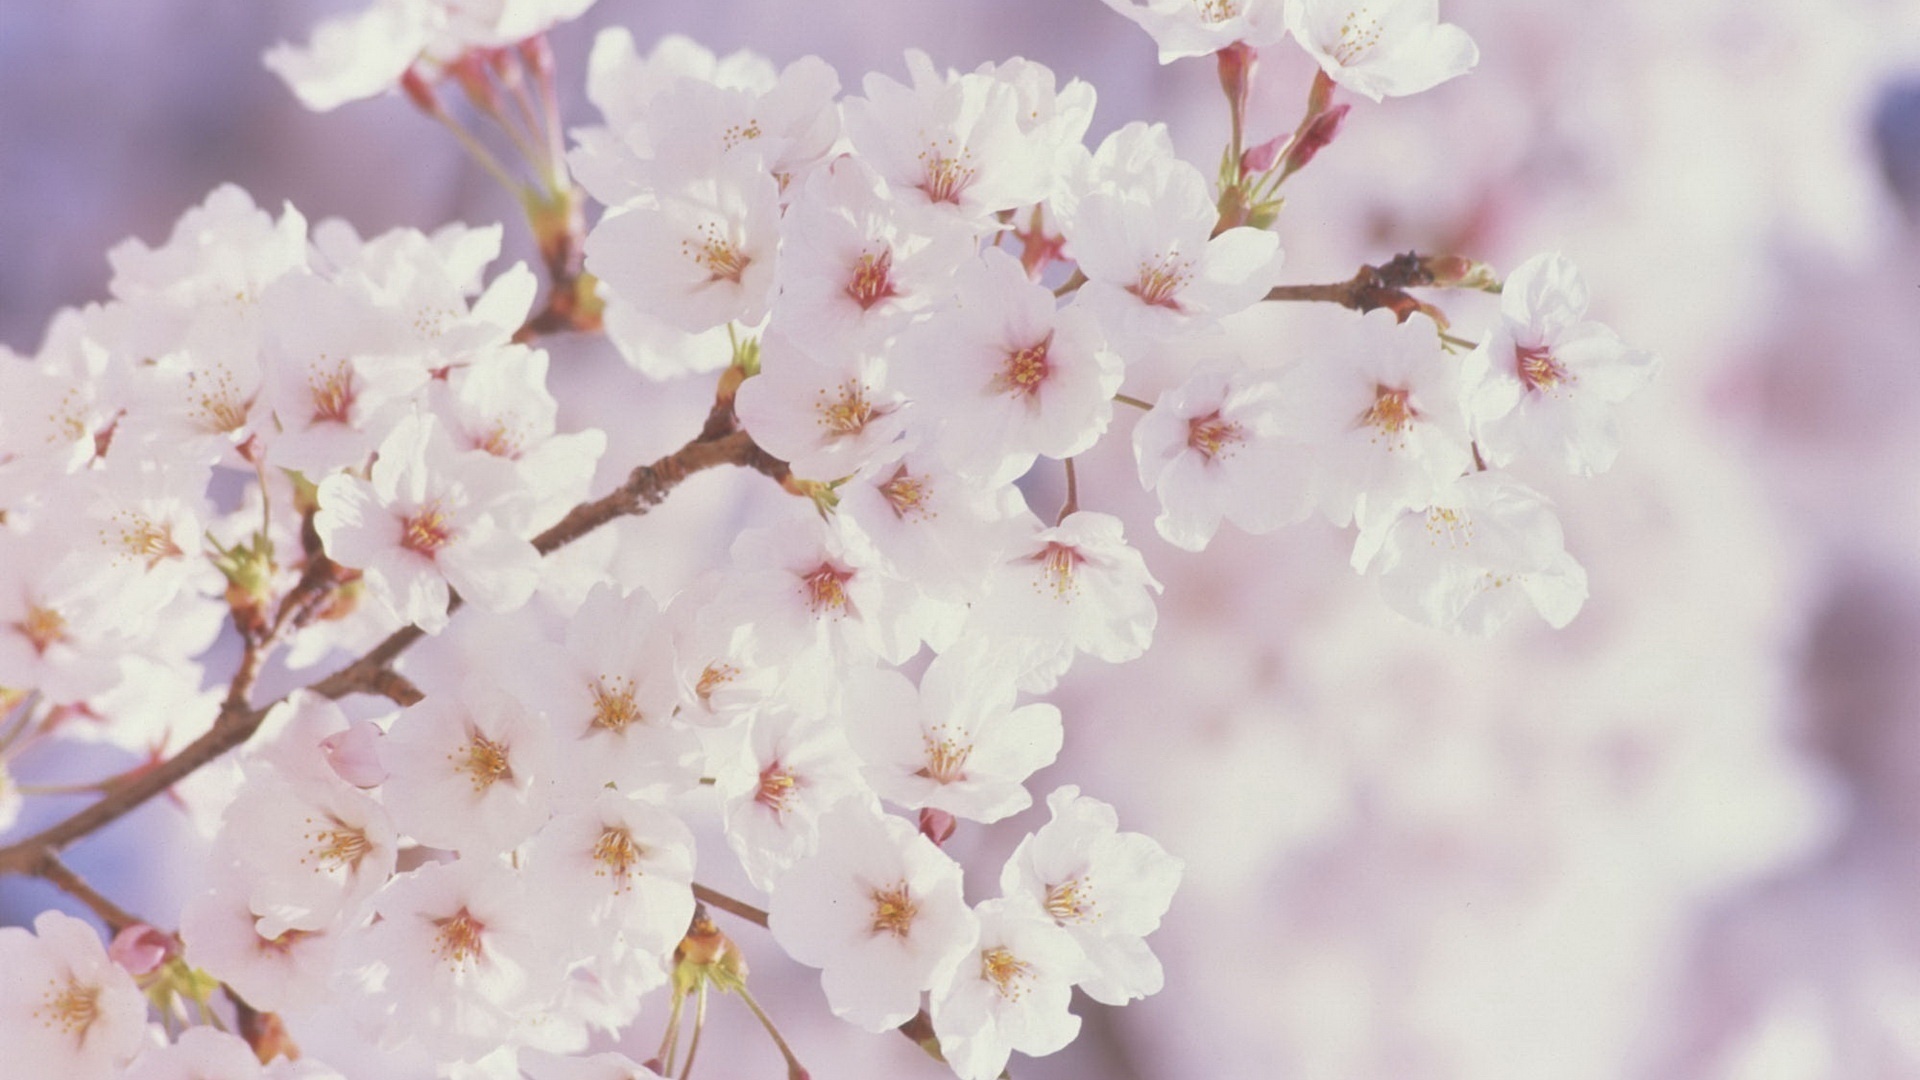 New Spring Flowers FHDQ Wallpapers for mobile and desktop